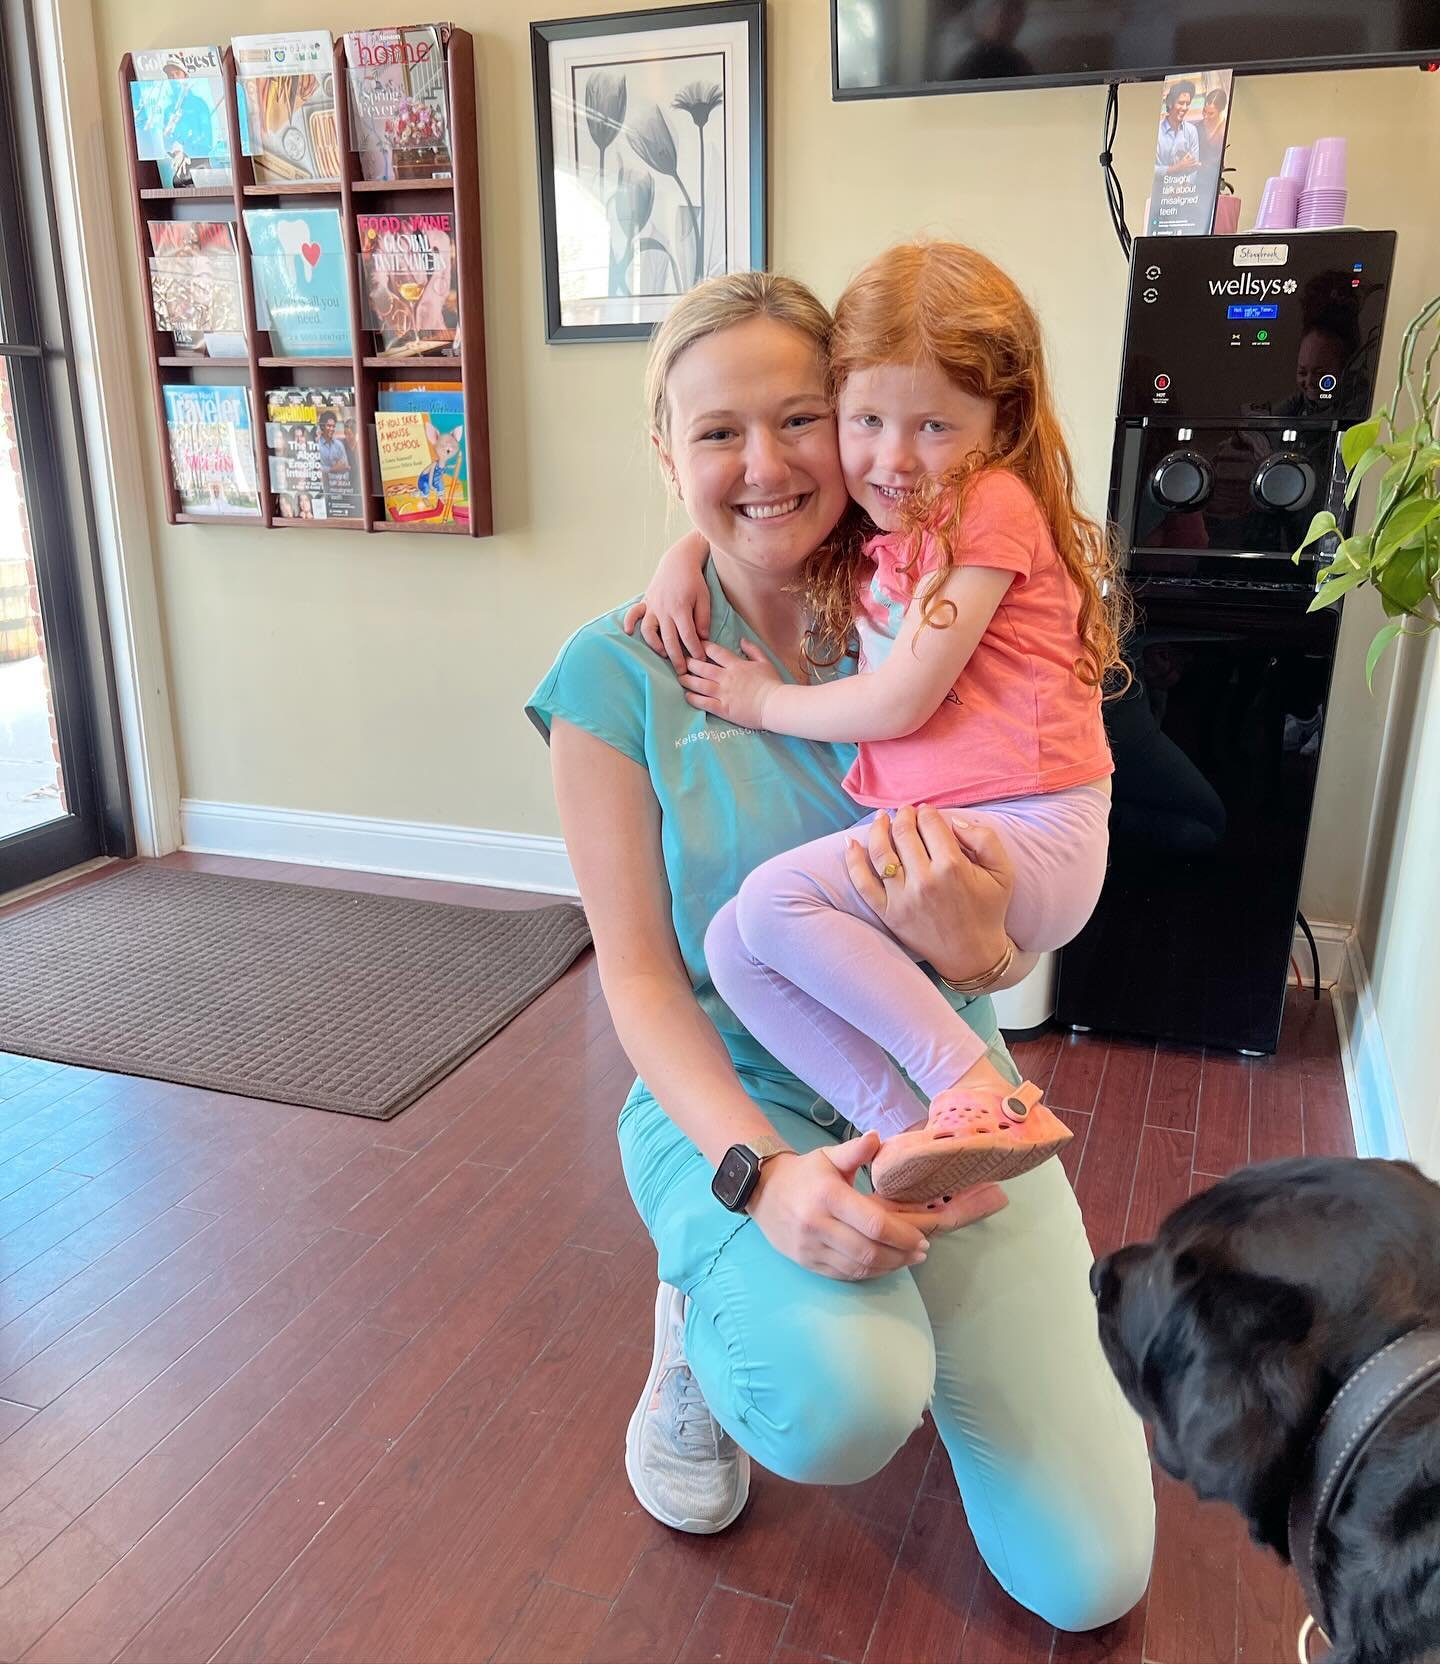 Big smiles today at Bjornson Family Dentistry to carry us into the weekend! 

When we say we are a family practice, we really mean it. The docs love spending time with our kiddos!! 😁